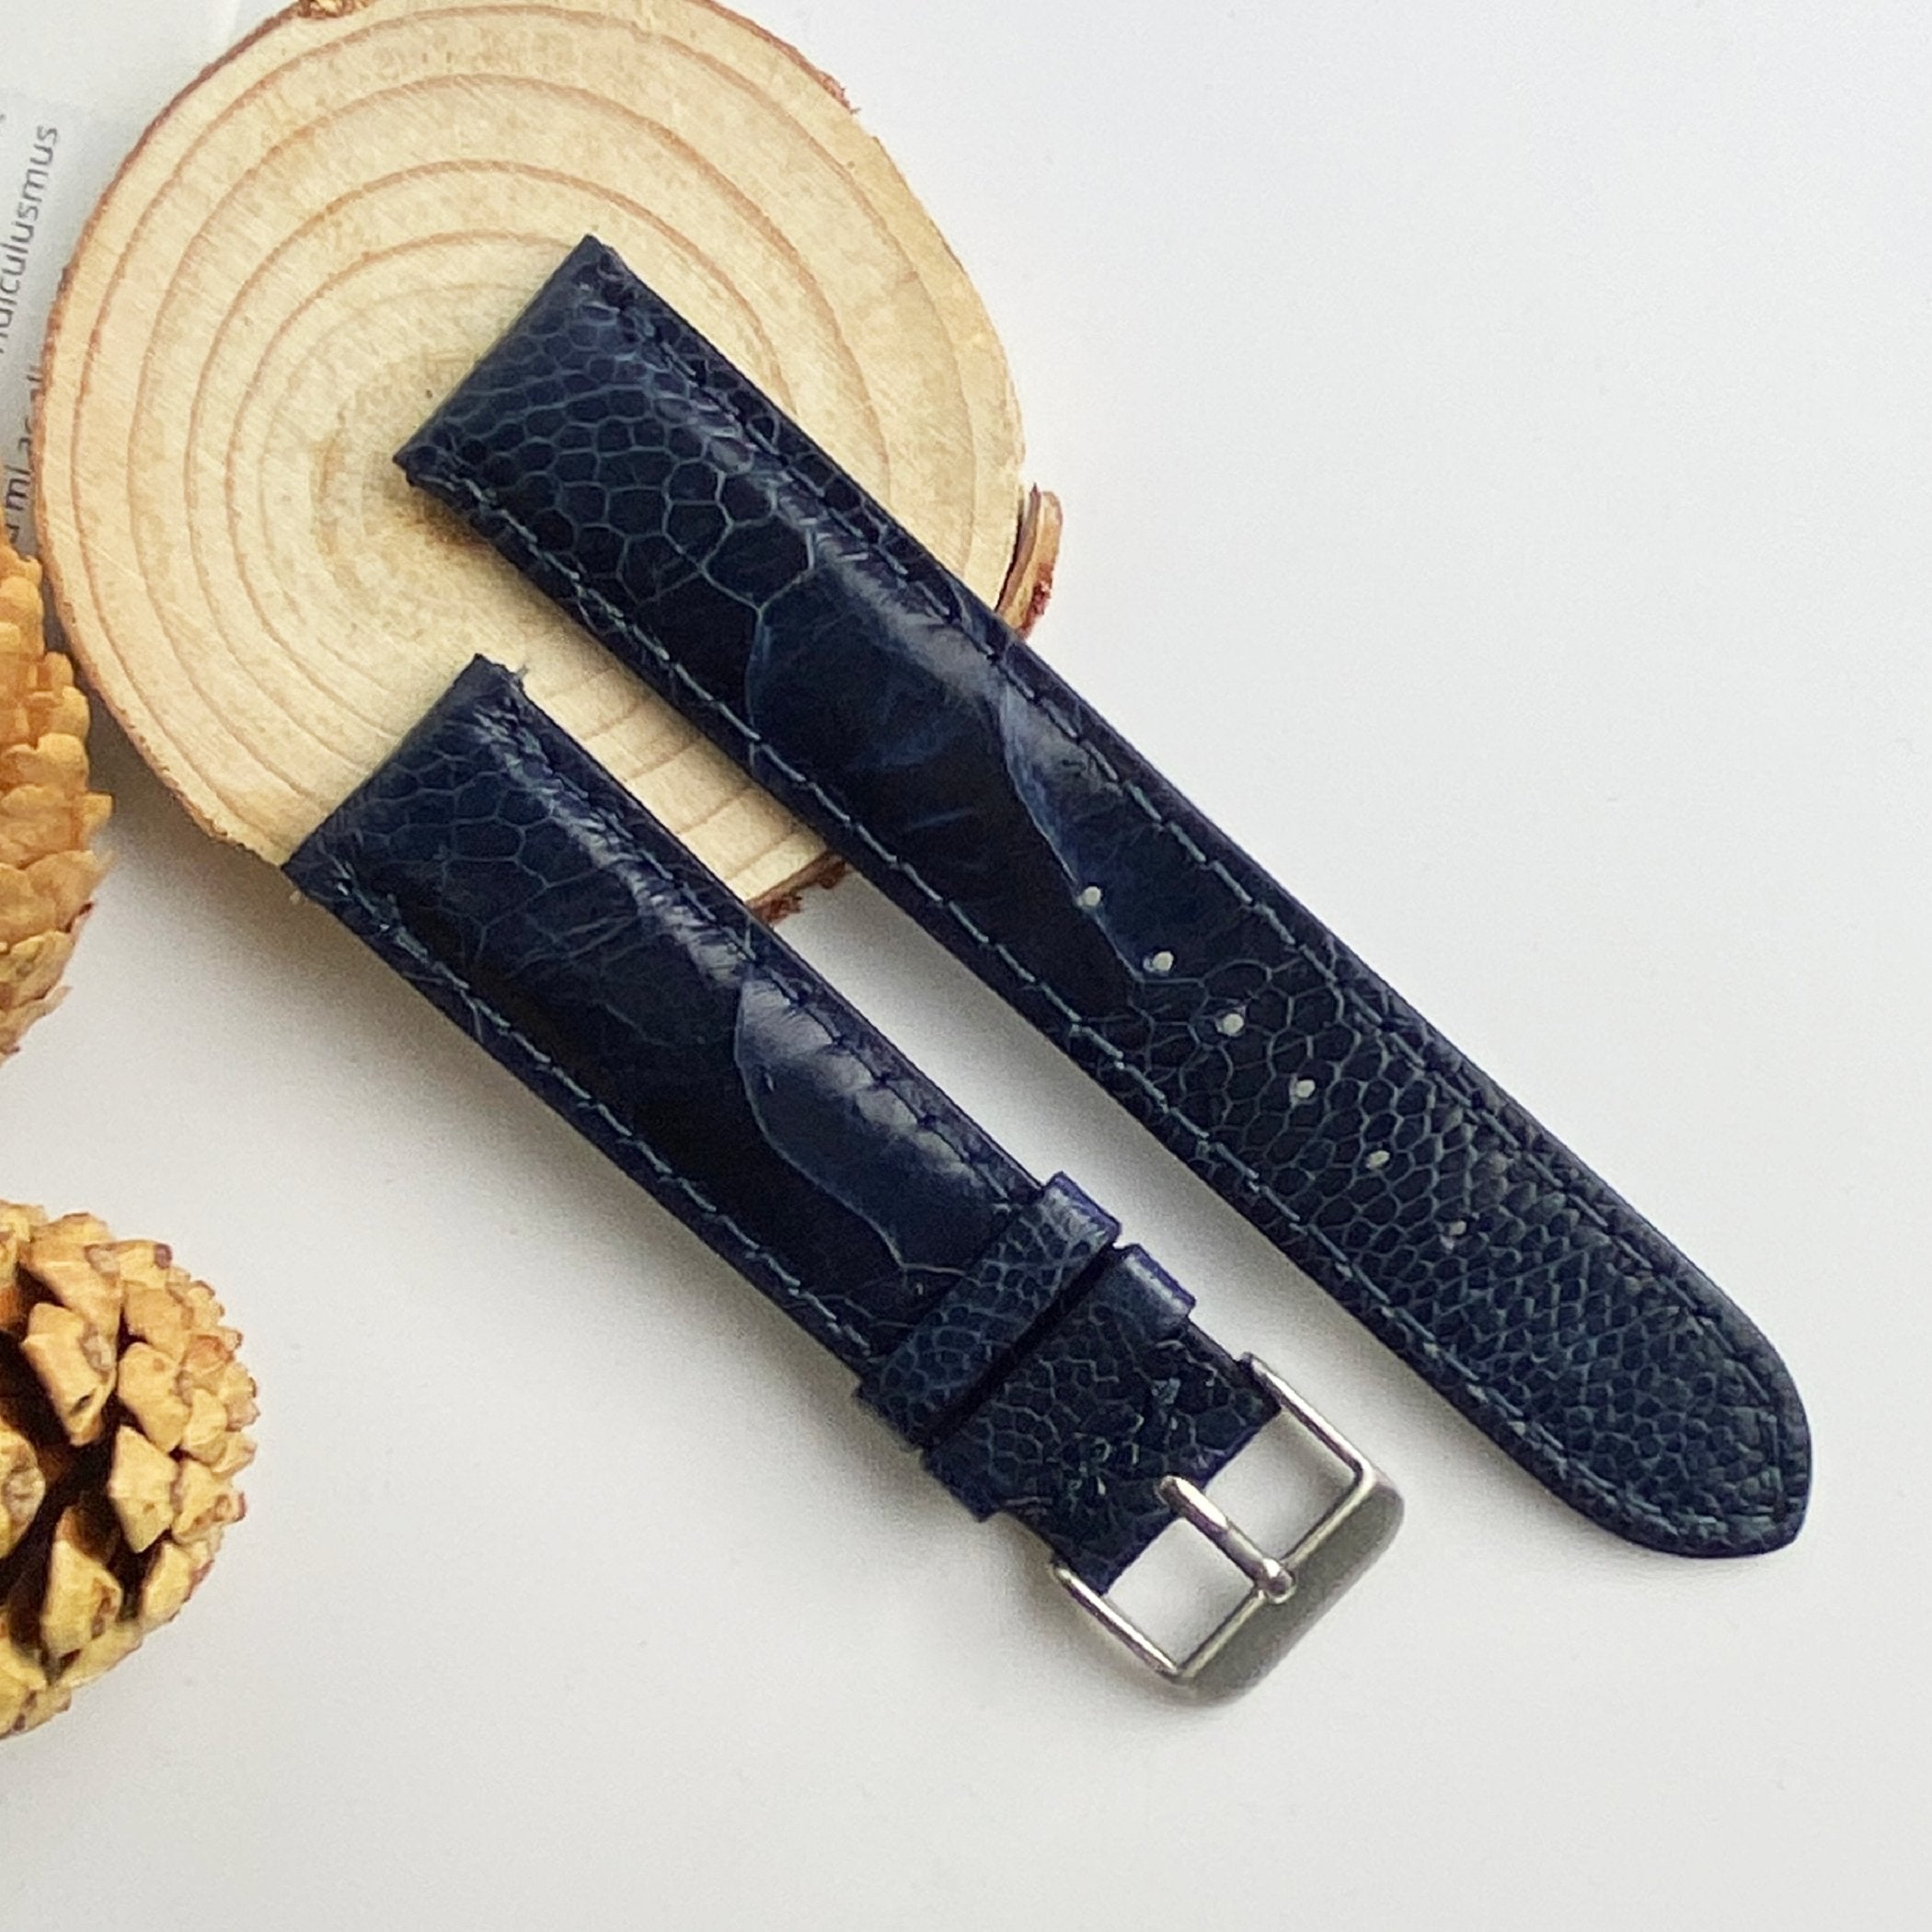 Navy blue Ostrich Leather Watch Strap Band | Men Quick Release Buckle Replacement Wristwatch Strap | DH-32 - Vinacreations